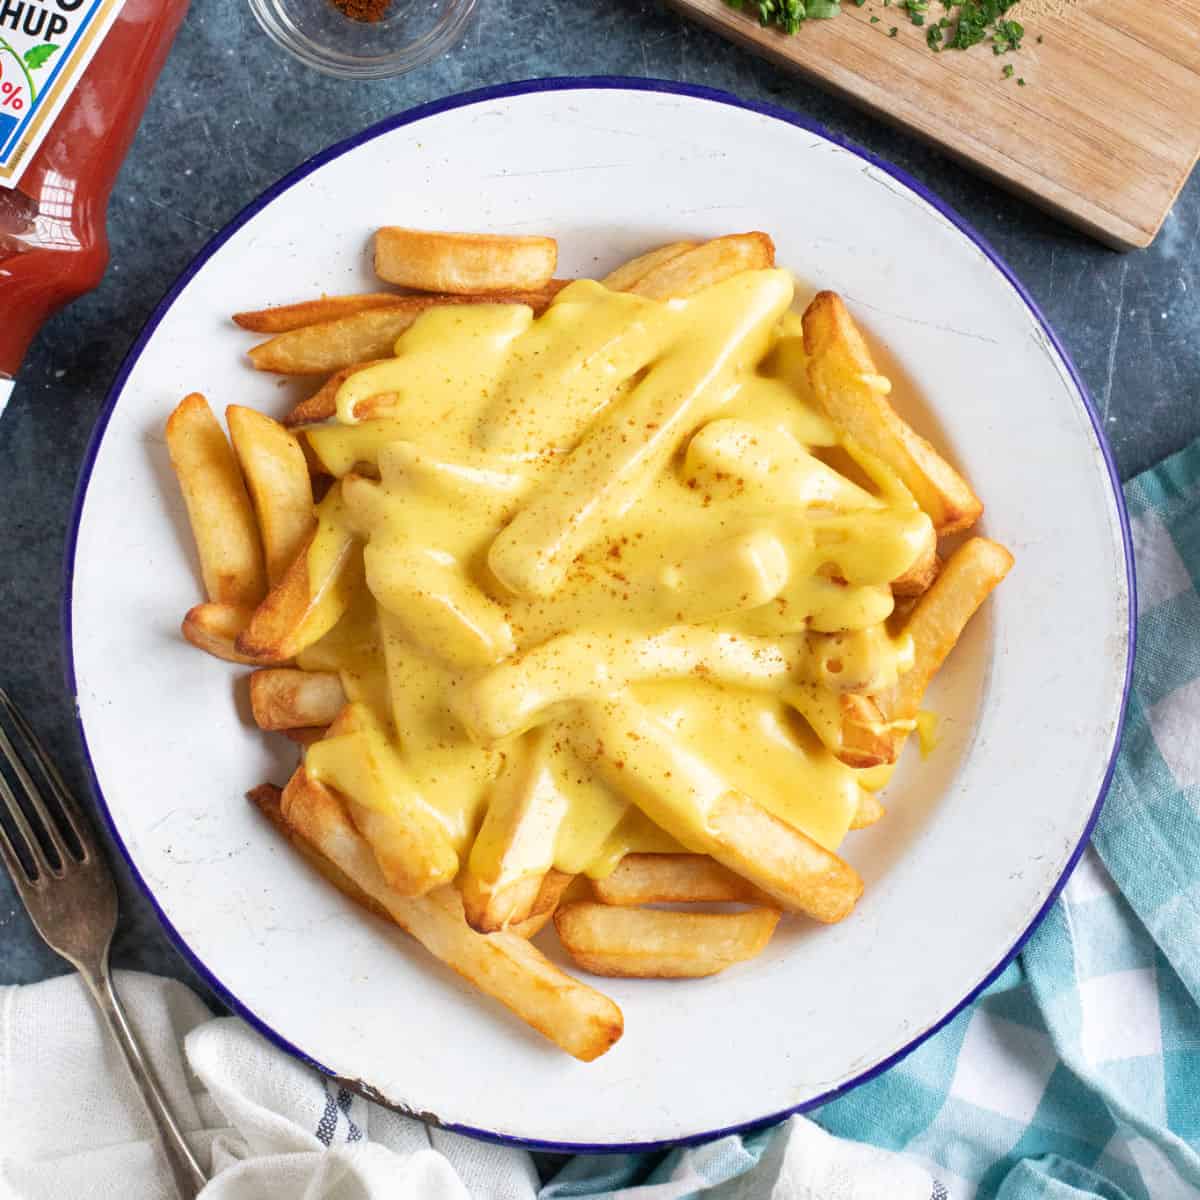 Chips with Cheese – Salt and Batter